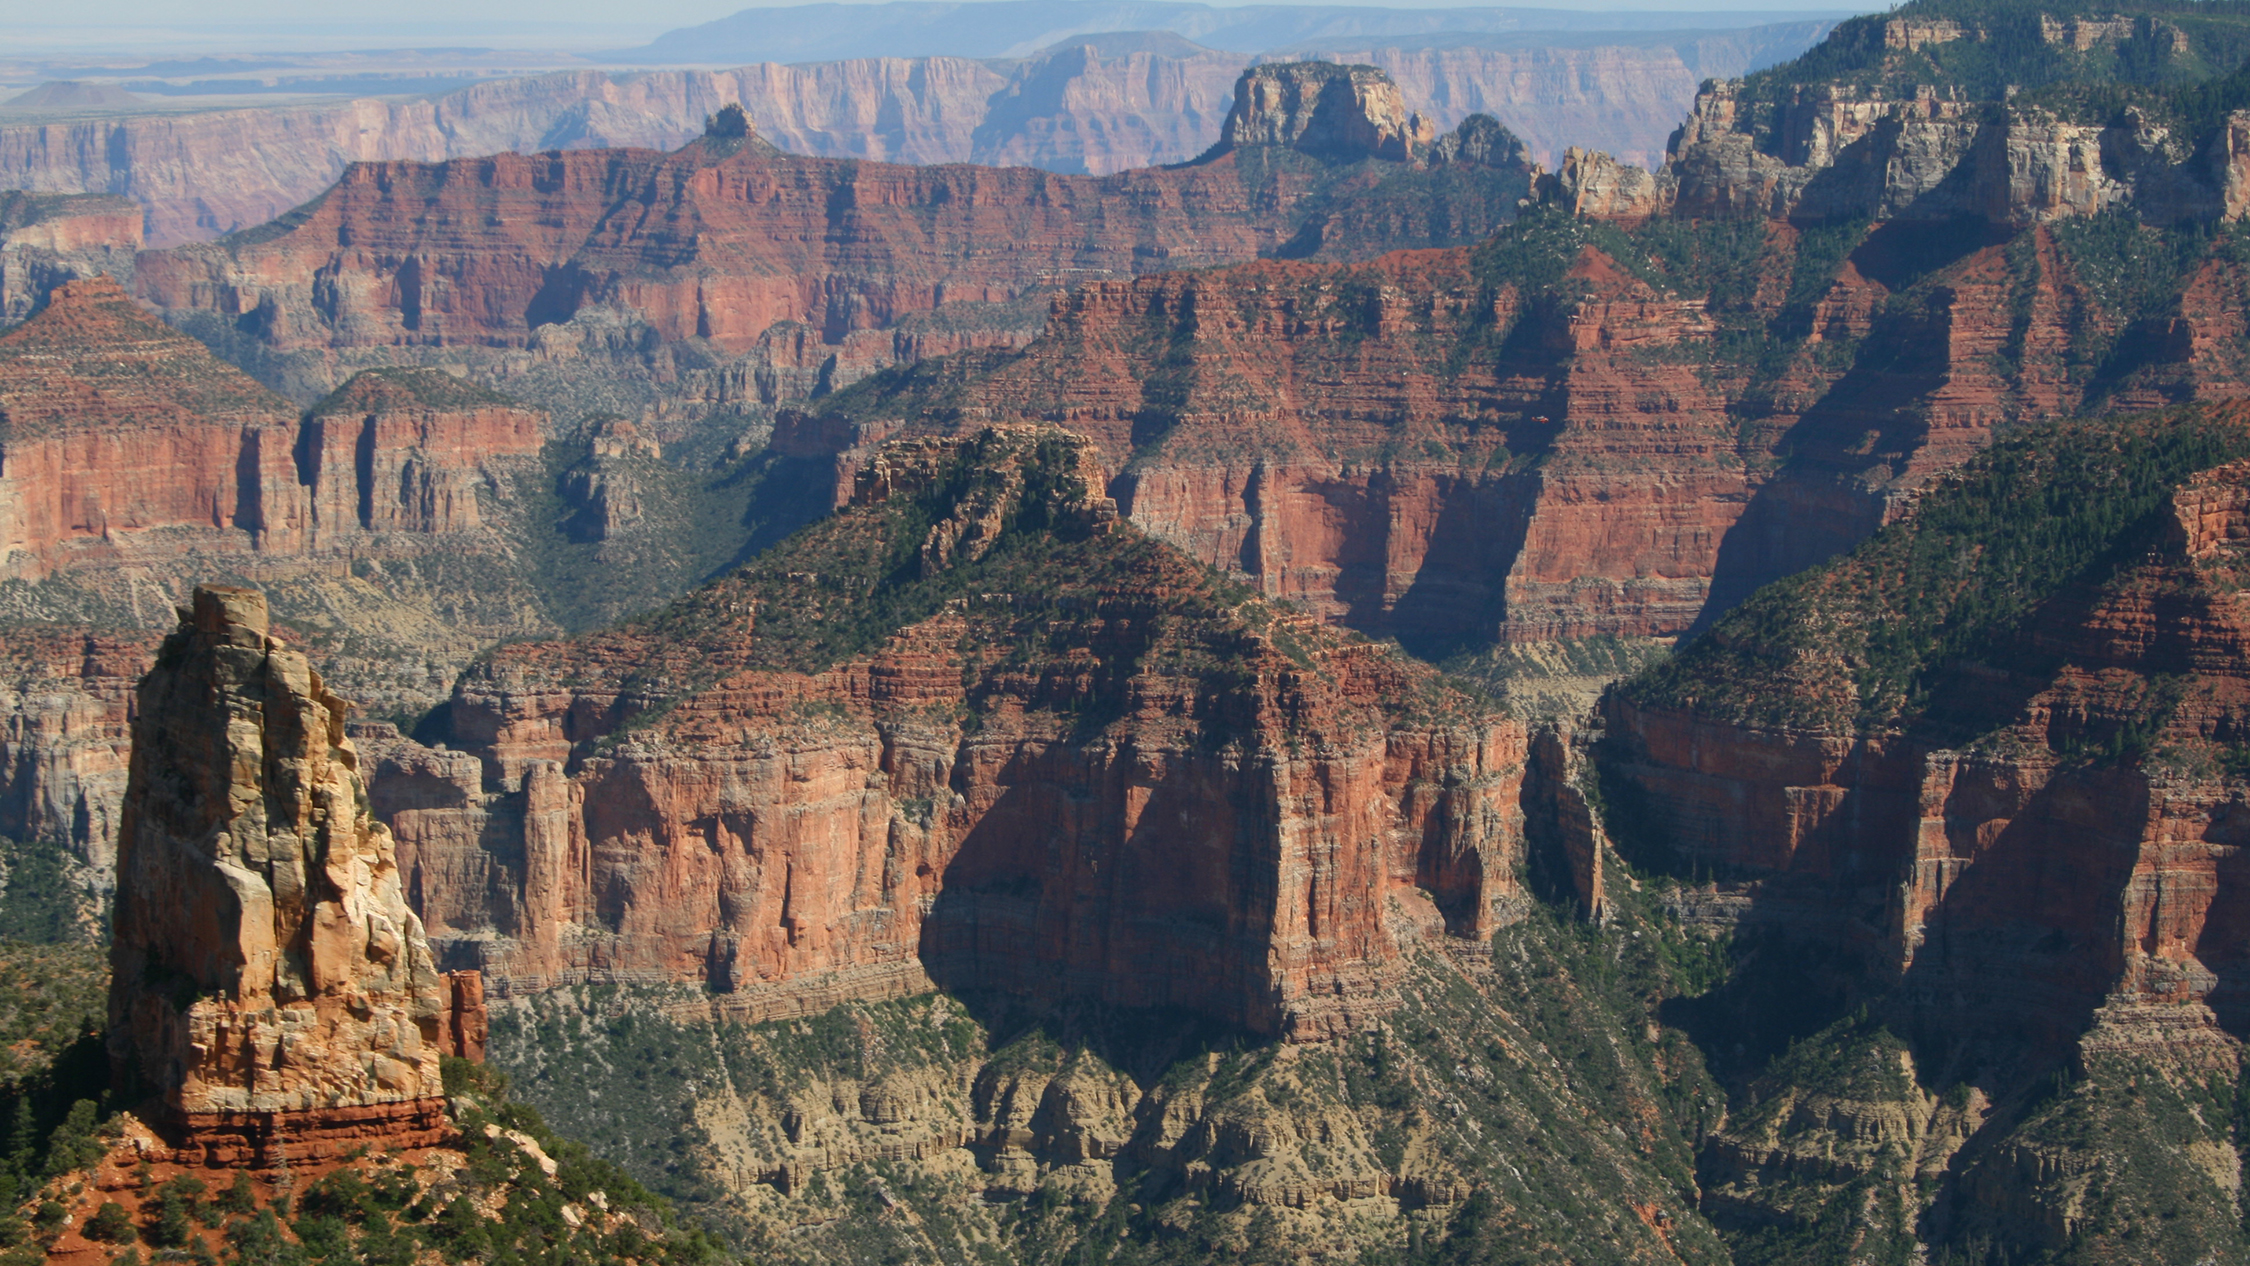 Point Imperial is the highest viewpoint on the Grand Canyon’s North Rim at 8,803 feet and overlooks the Painted Desert. This view is to the southeast.